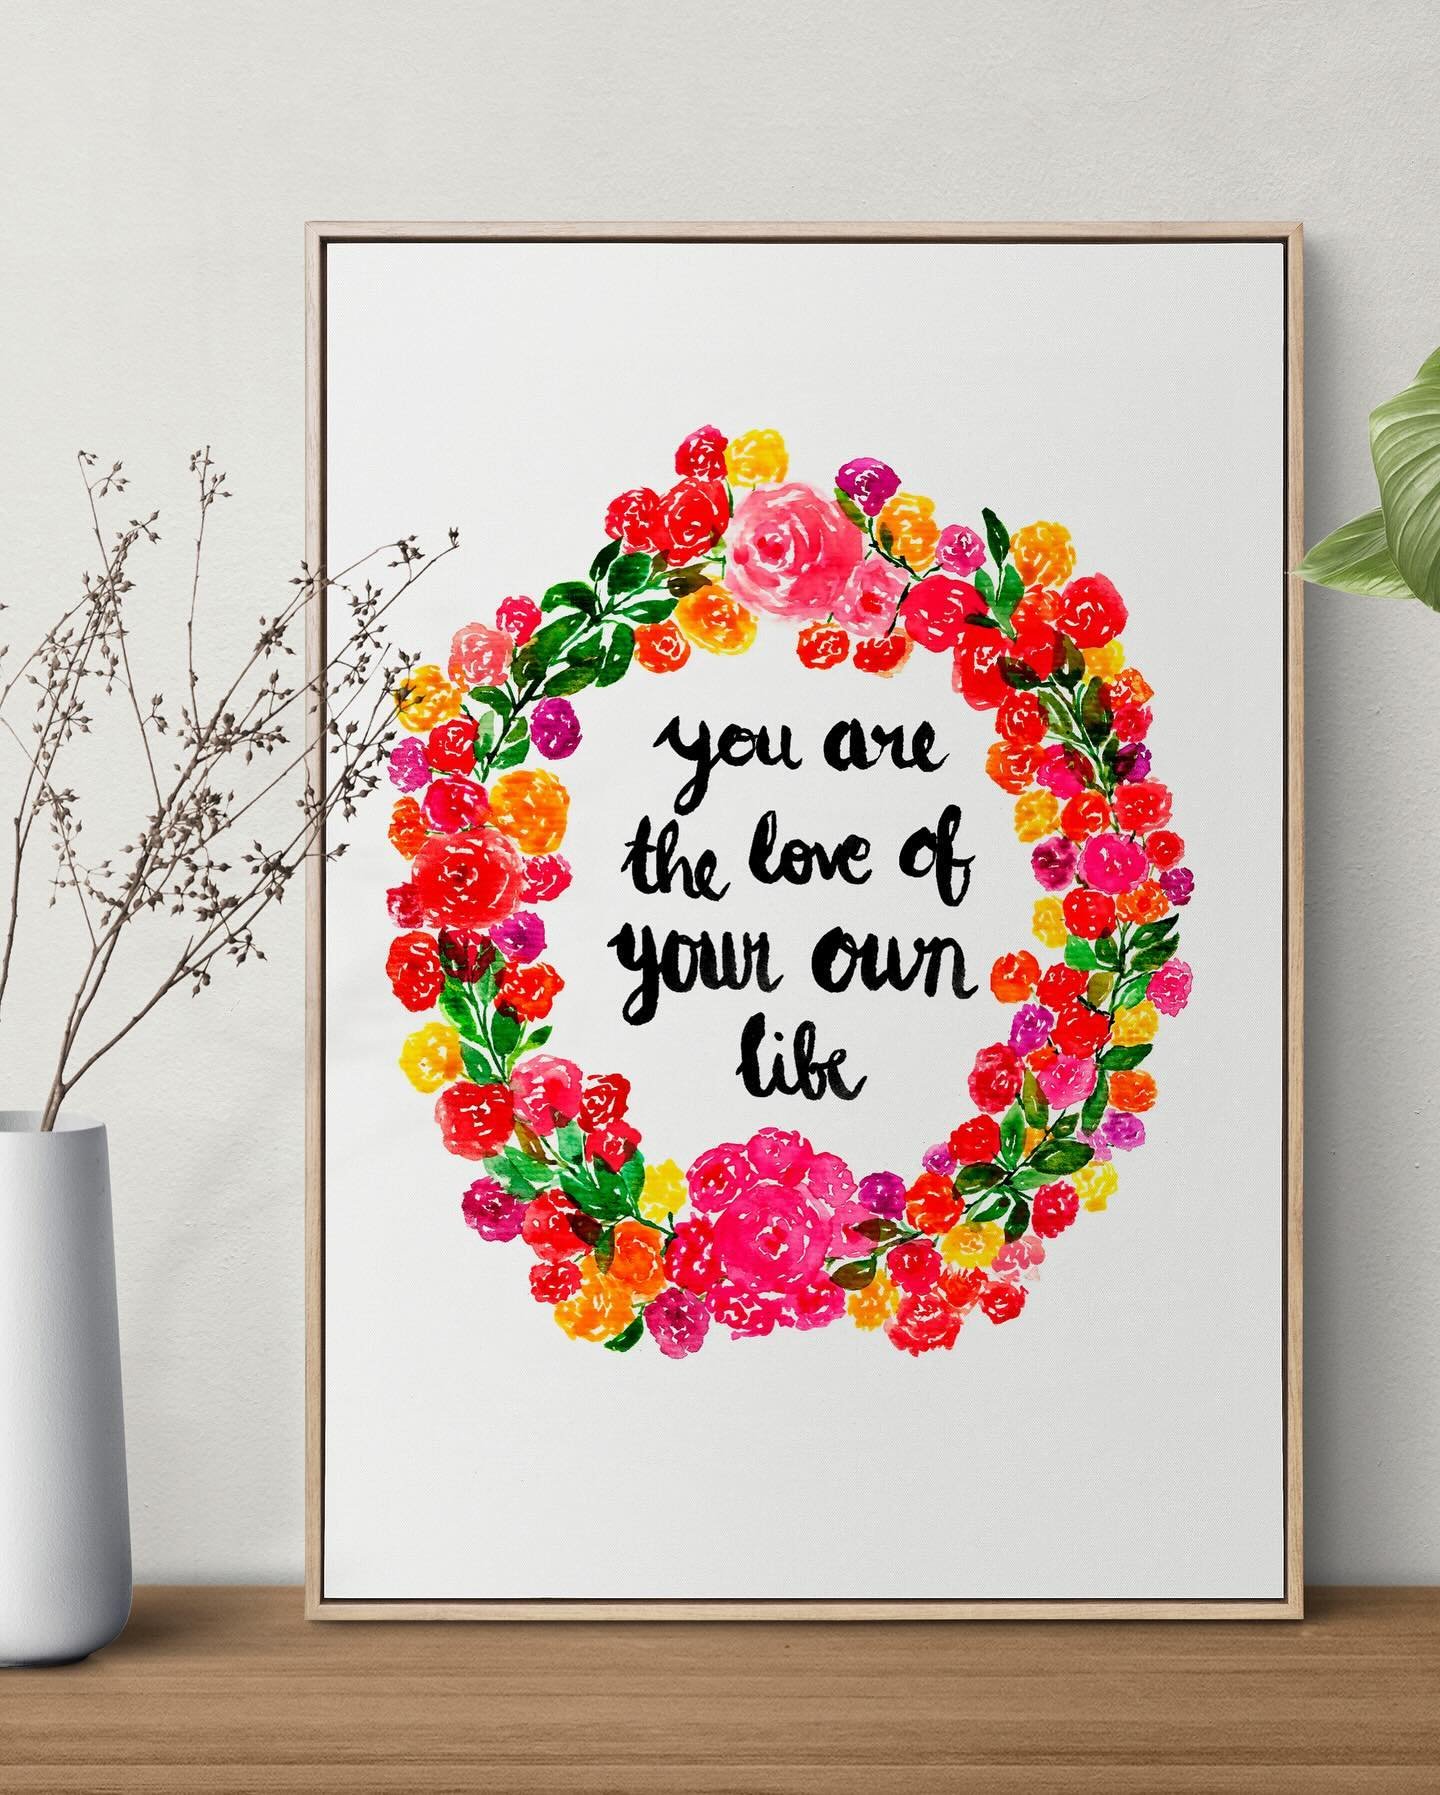 Sign up to my newsletter and get a high quality free digital download of my watercolor illustration &ldquo;You Are The Love Of Your Own Life&rdquo;, 9&rdquo; x 12&rdquo; perfect for 11&rdquo; x 14&rdquo; or 16&rdquo; x 20&rdquo; photo frame!! Once yo